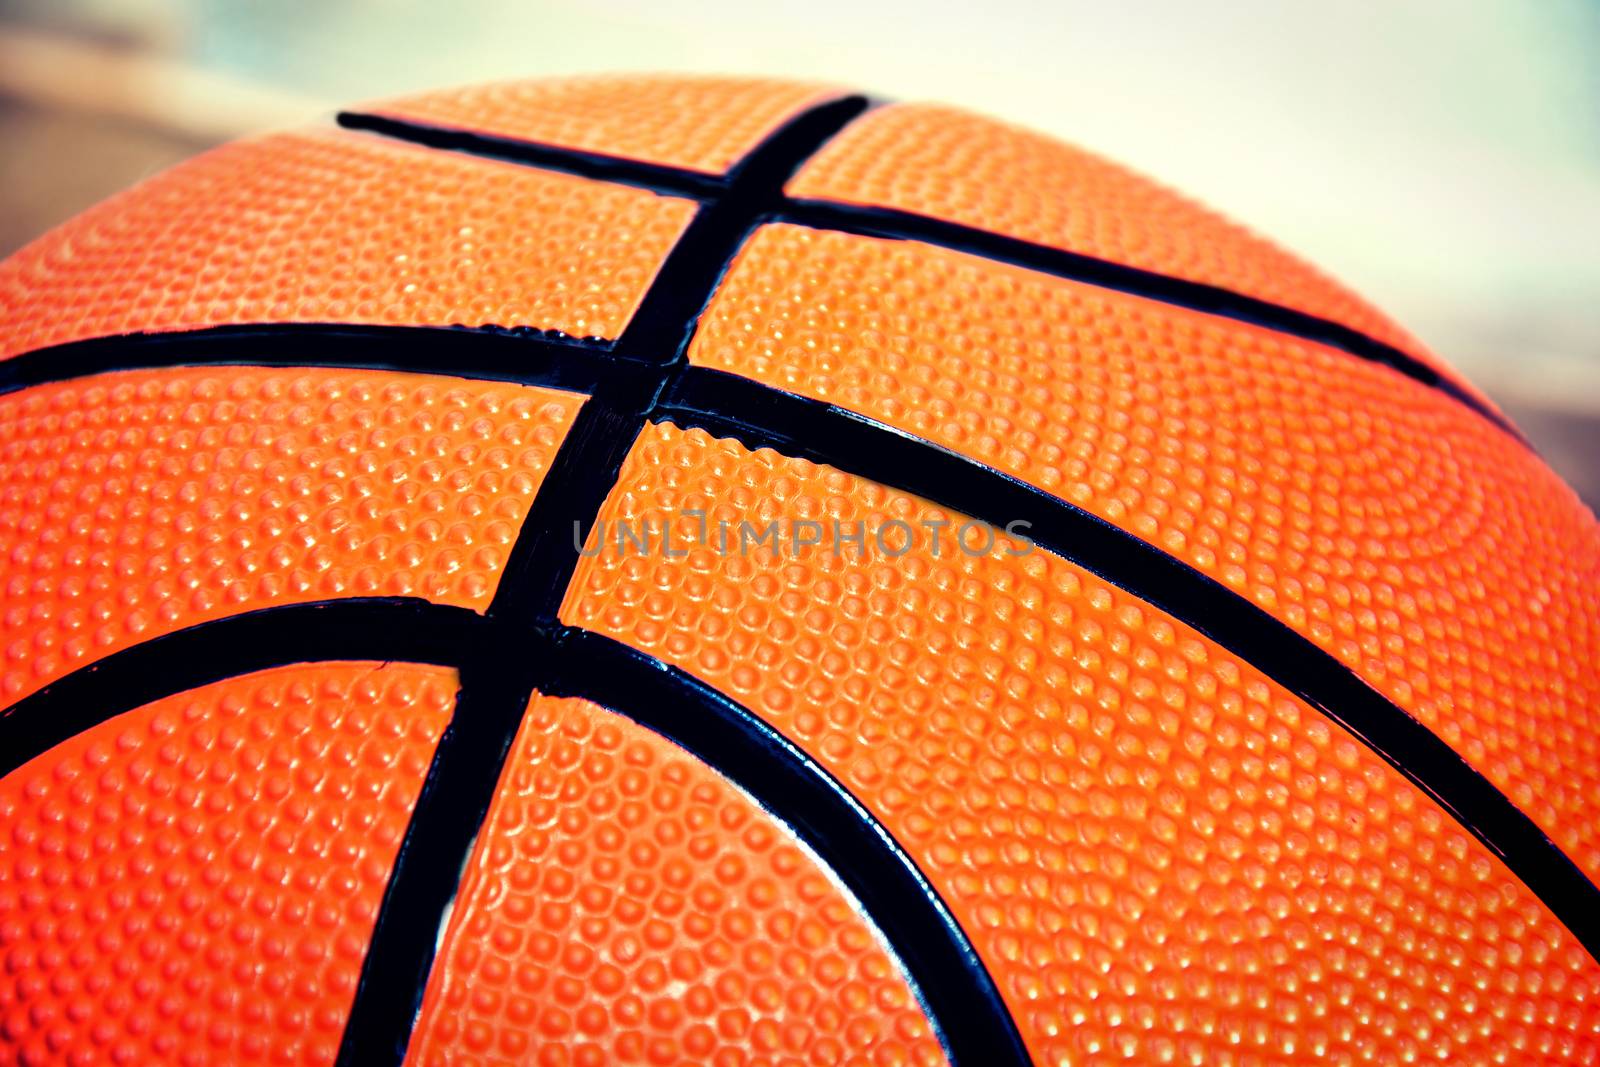 Basketball game. Basketball ball close up picture.